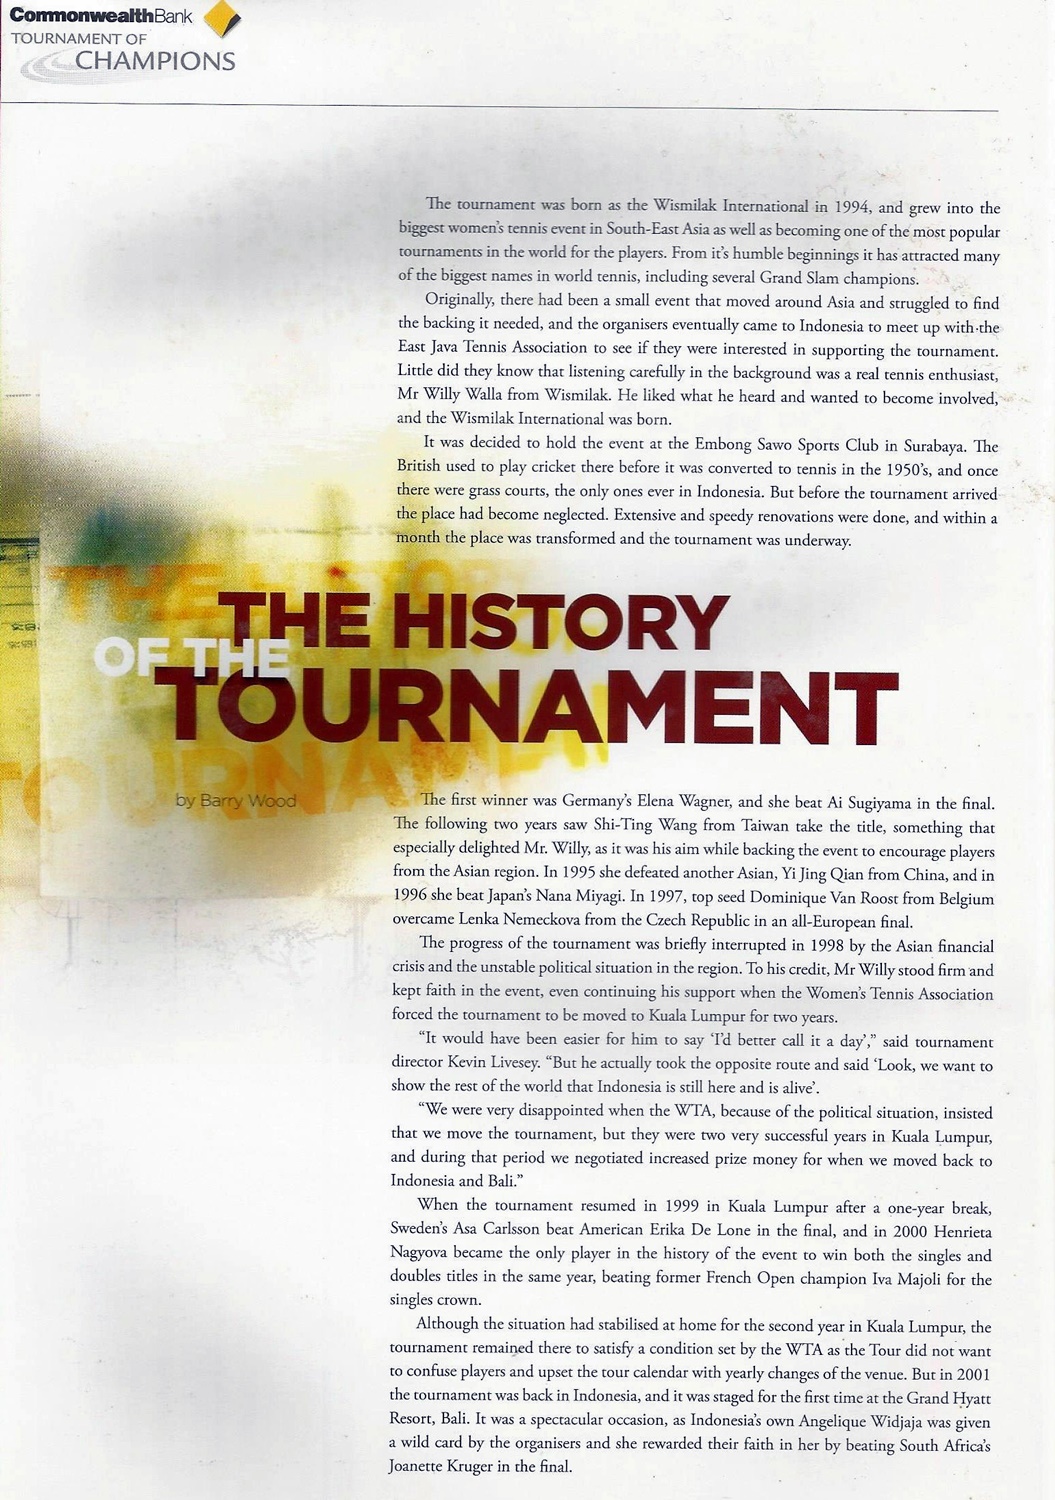 The History of the Tournament #1 by Barry Wood